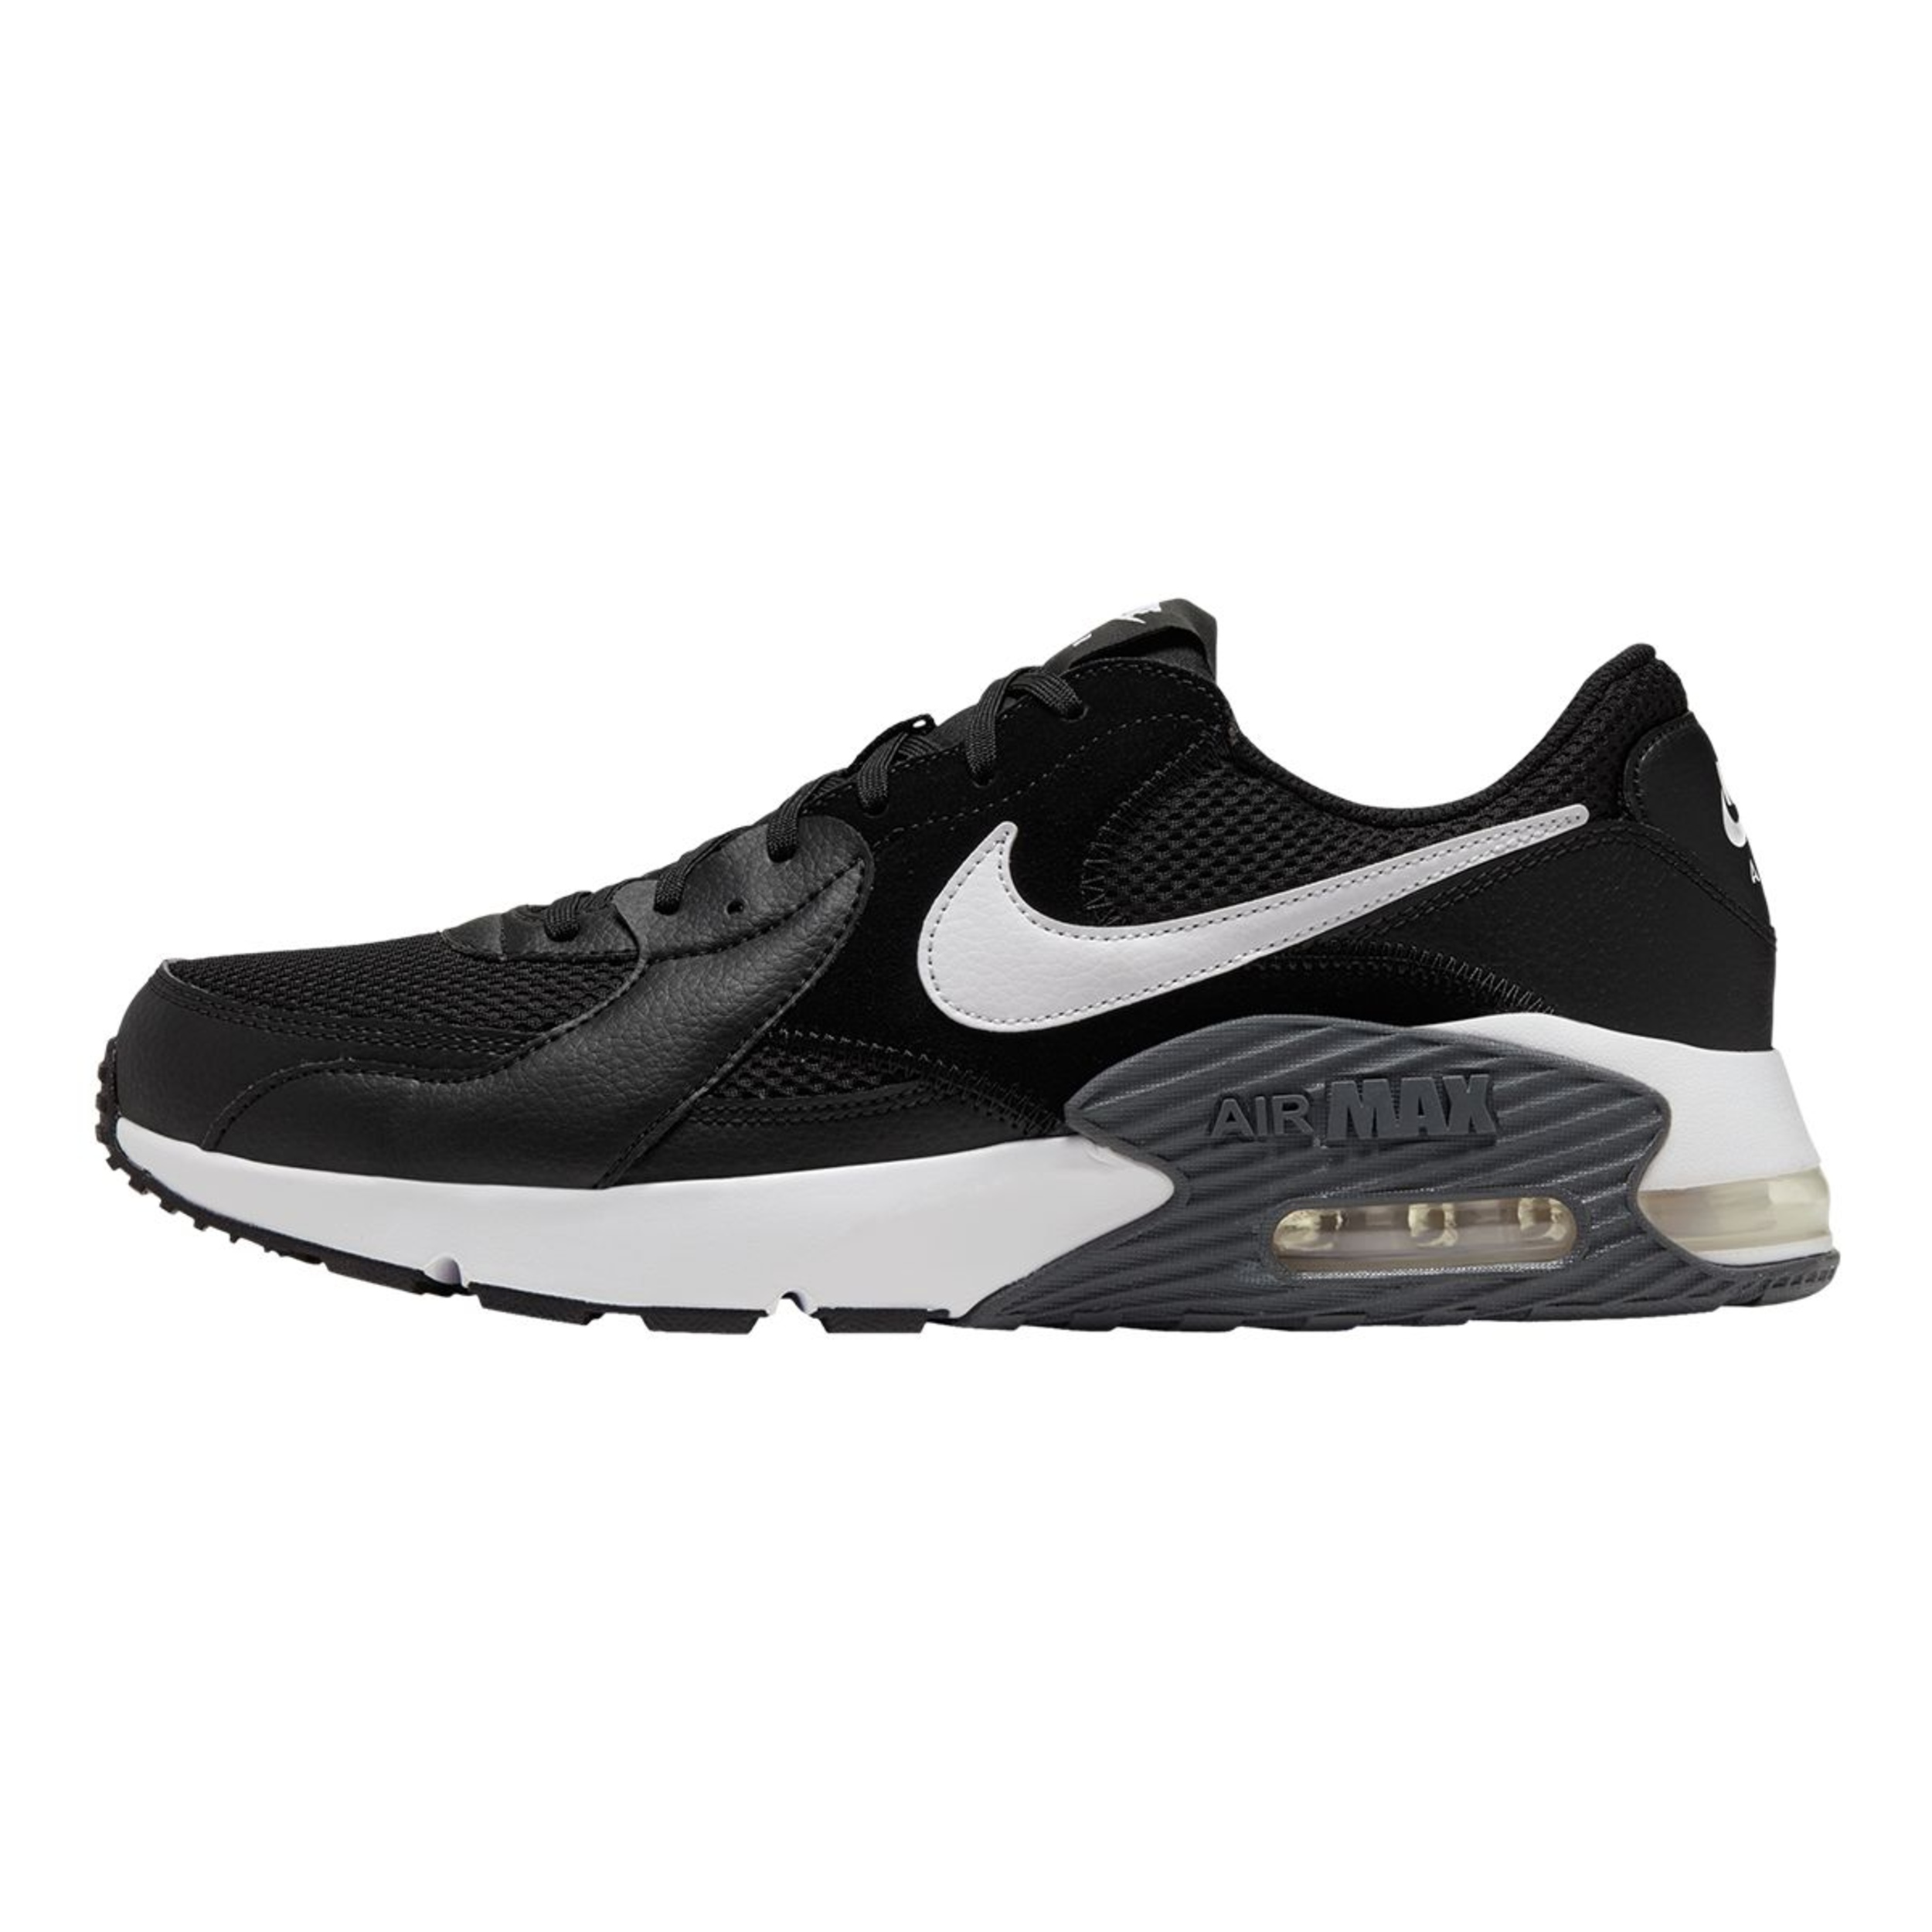 Nike Men's Air Max Excee Shoes, Sneakers, Cushioned, Lightweight ...